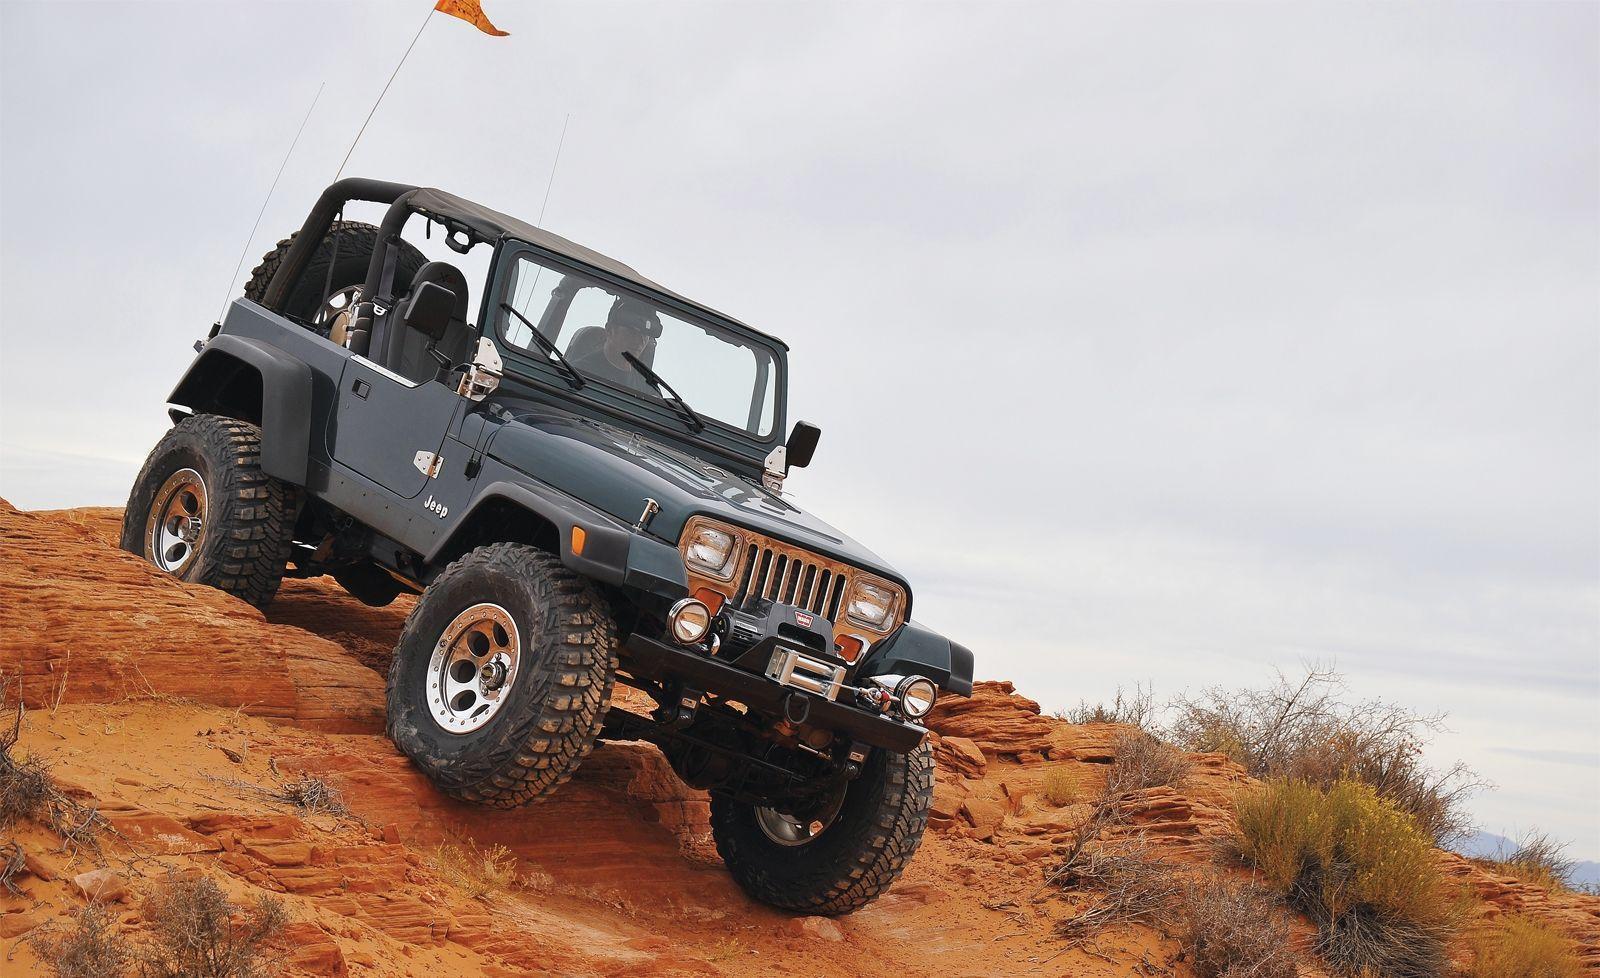 Free Jeep Wallpaper, HD Jeep Wallpaper and Photo. View HD